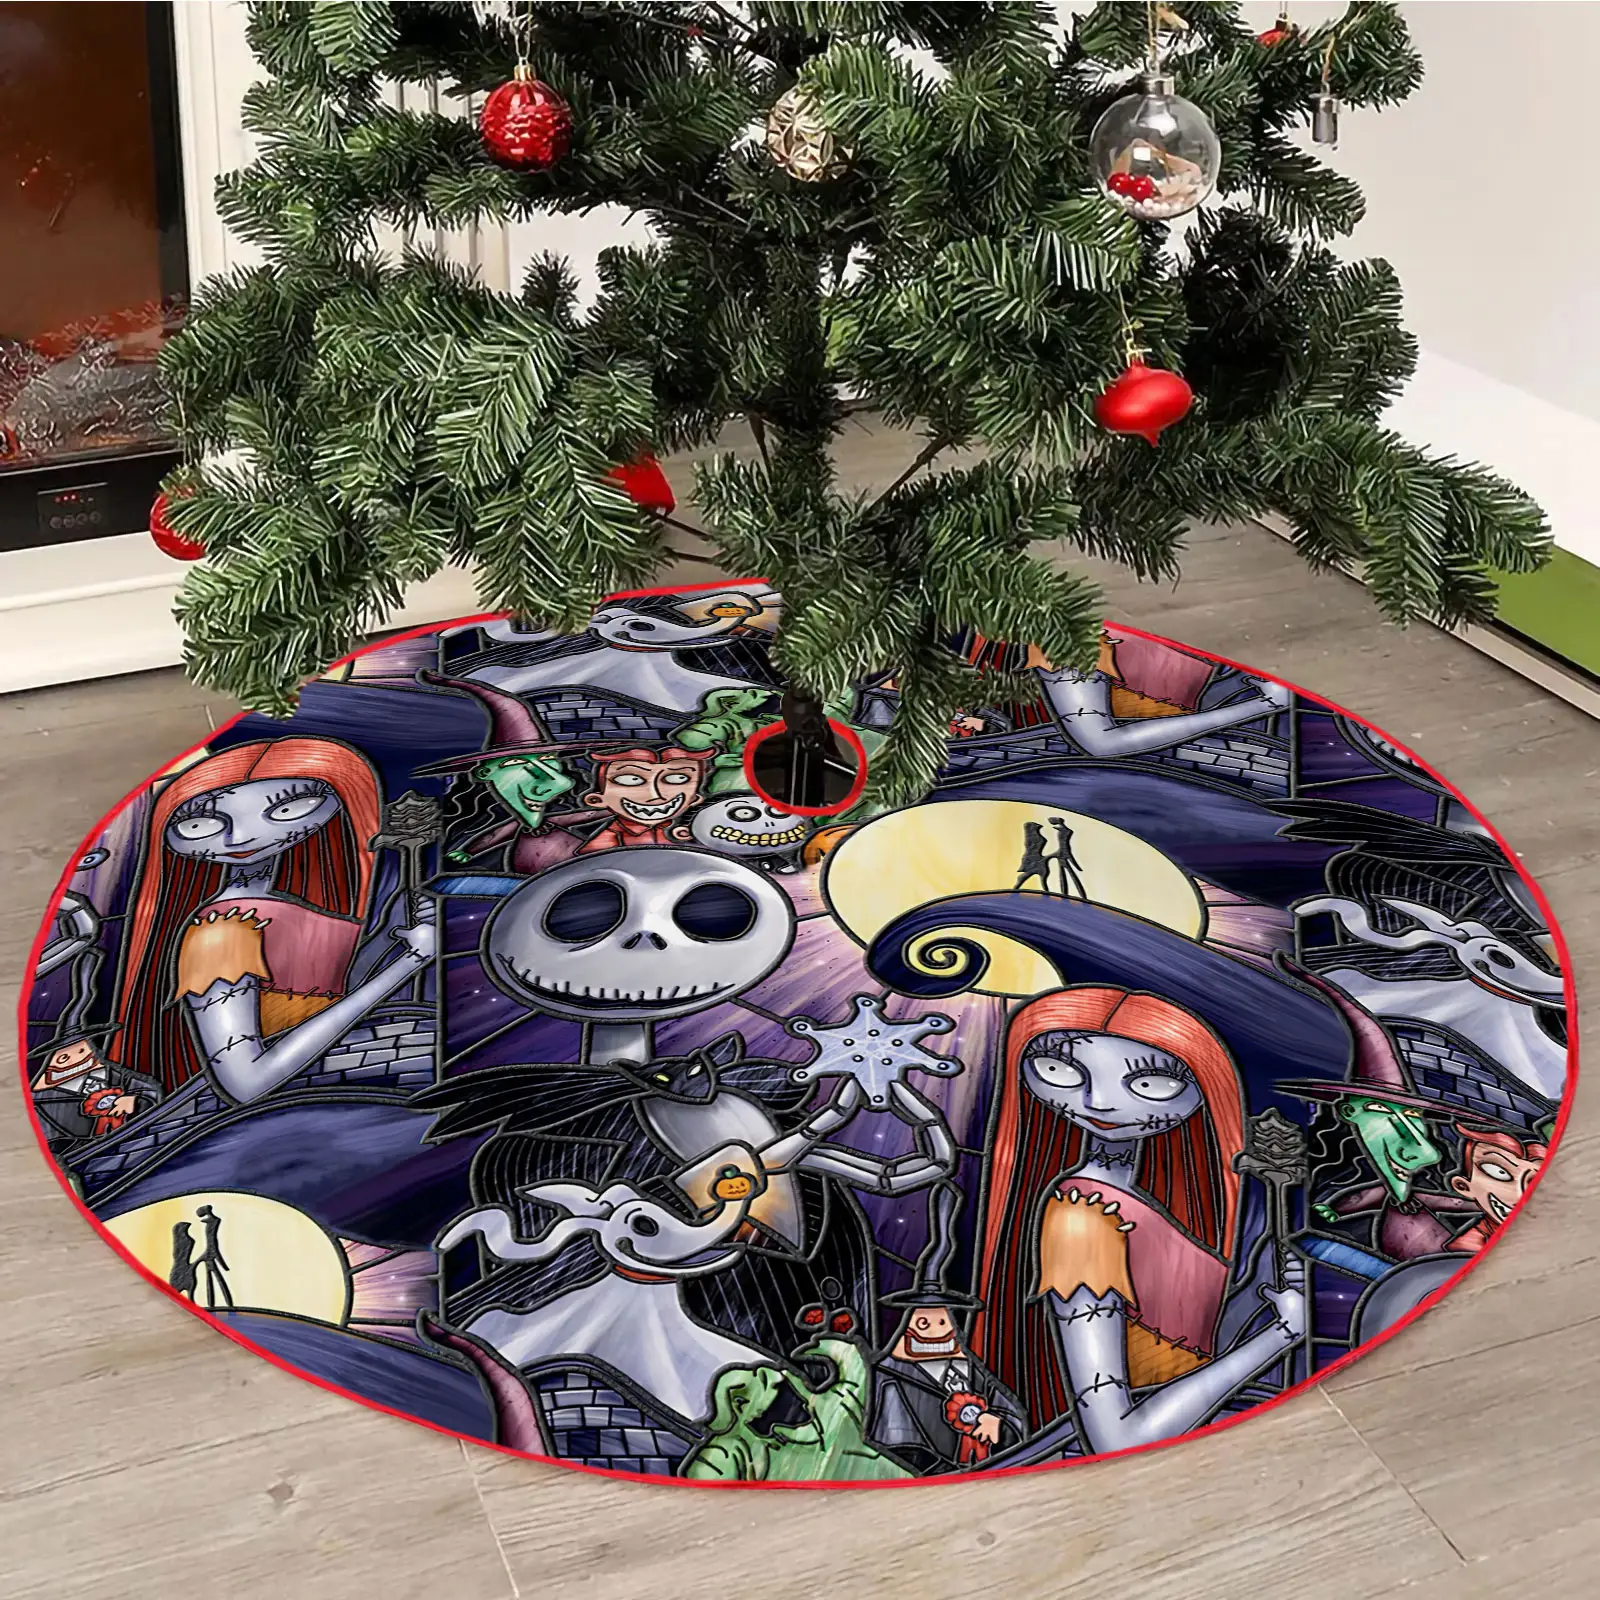 New Arrival Tree Skirt Christmas Decorations 48 Inch Cartoon Ornaments Gifts Christmas Tree Skirts for Party Holiday